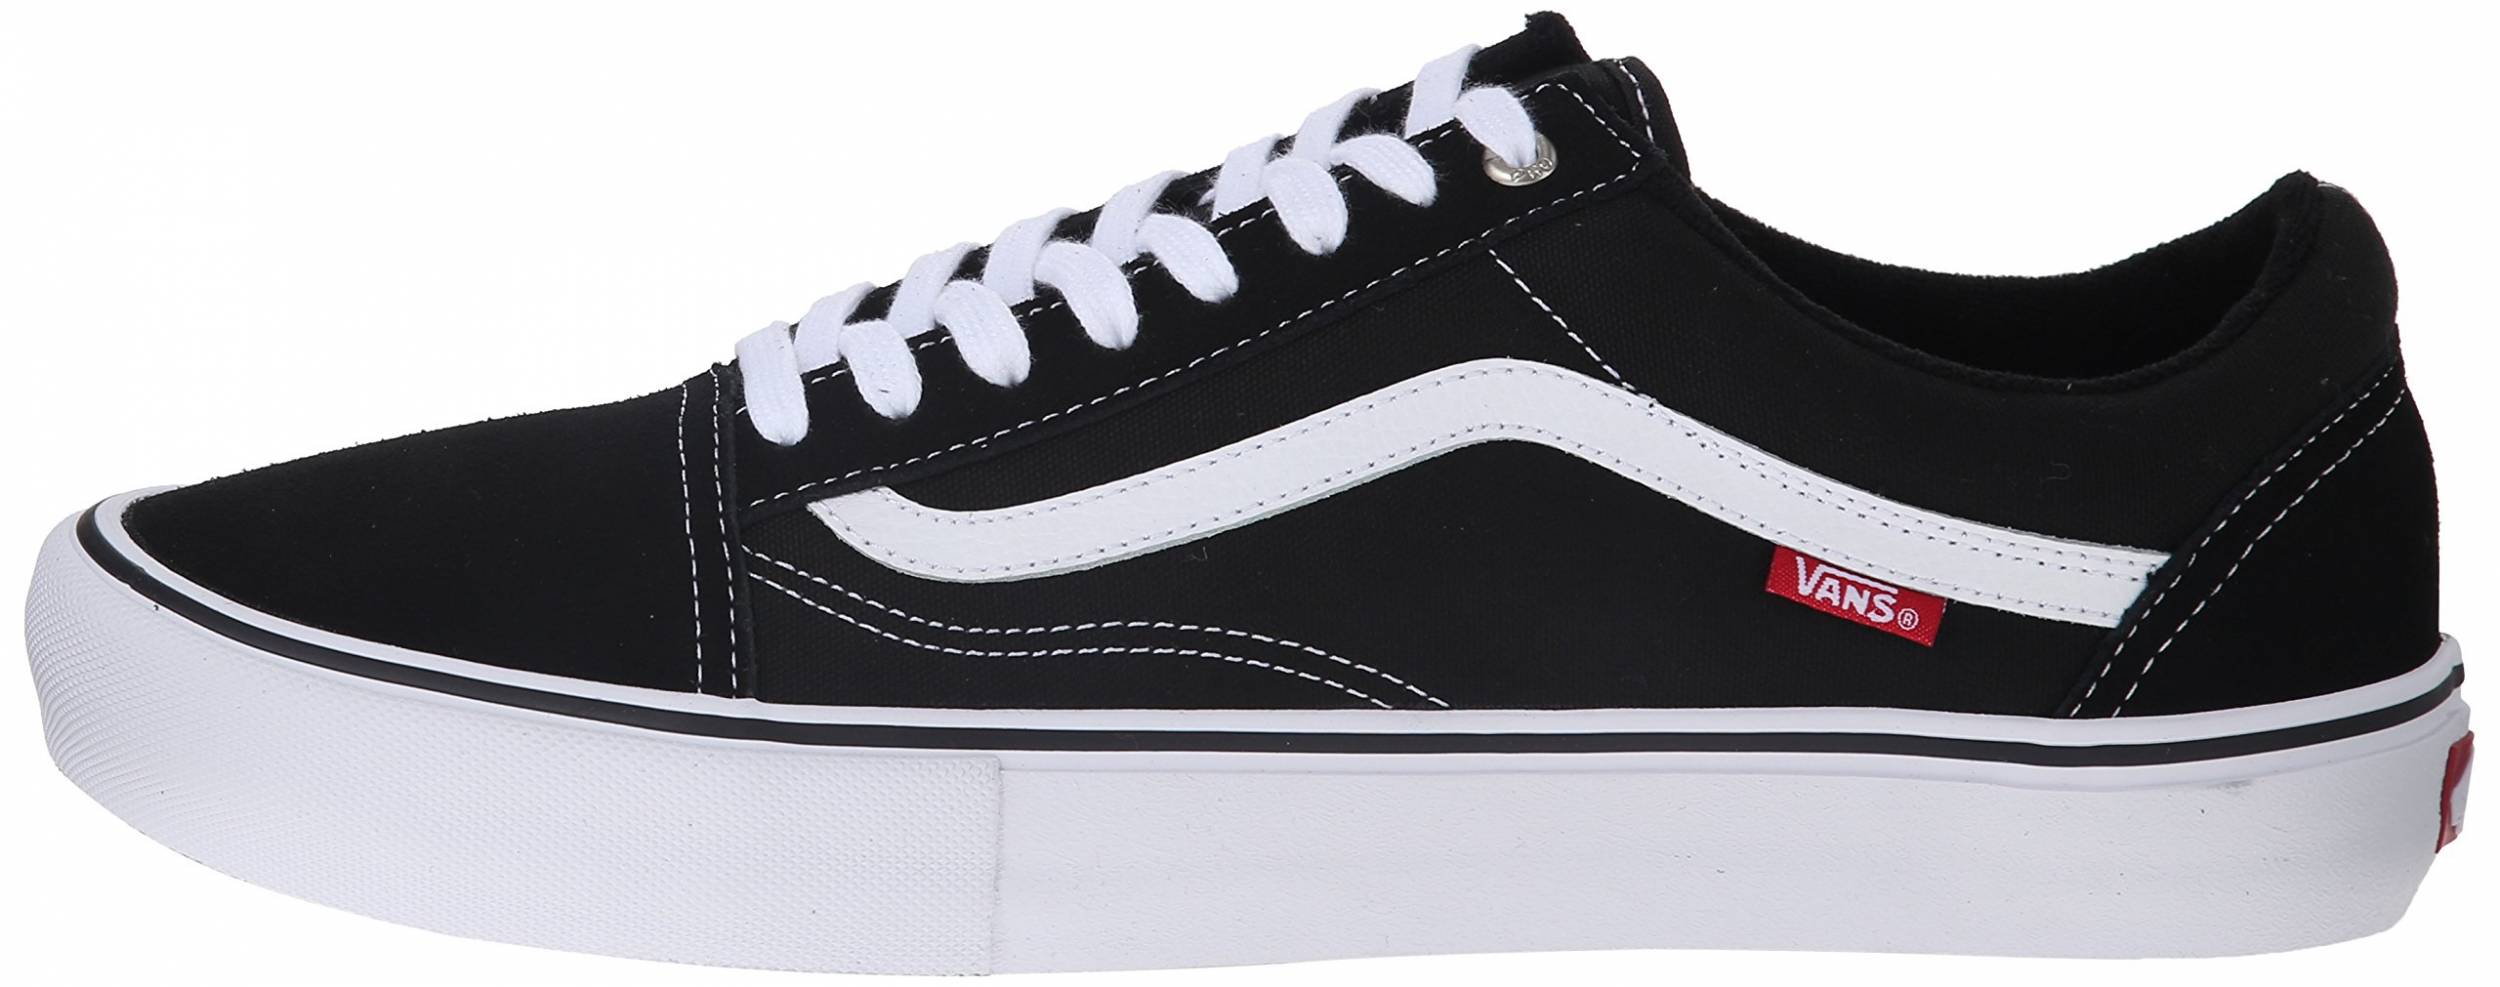 Only $63 + Review of Vans Old Skool Pro 